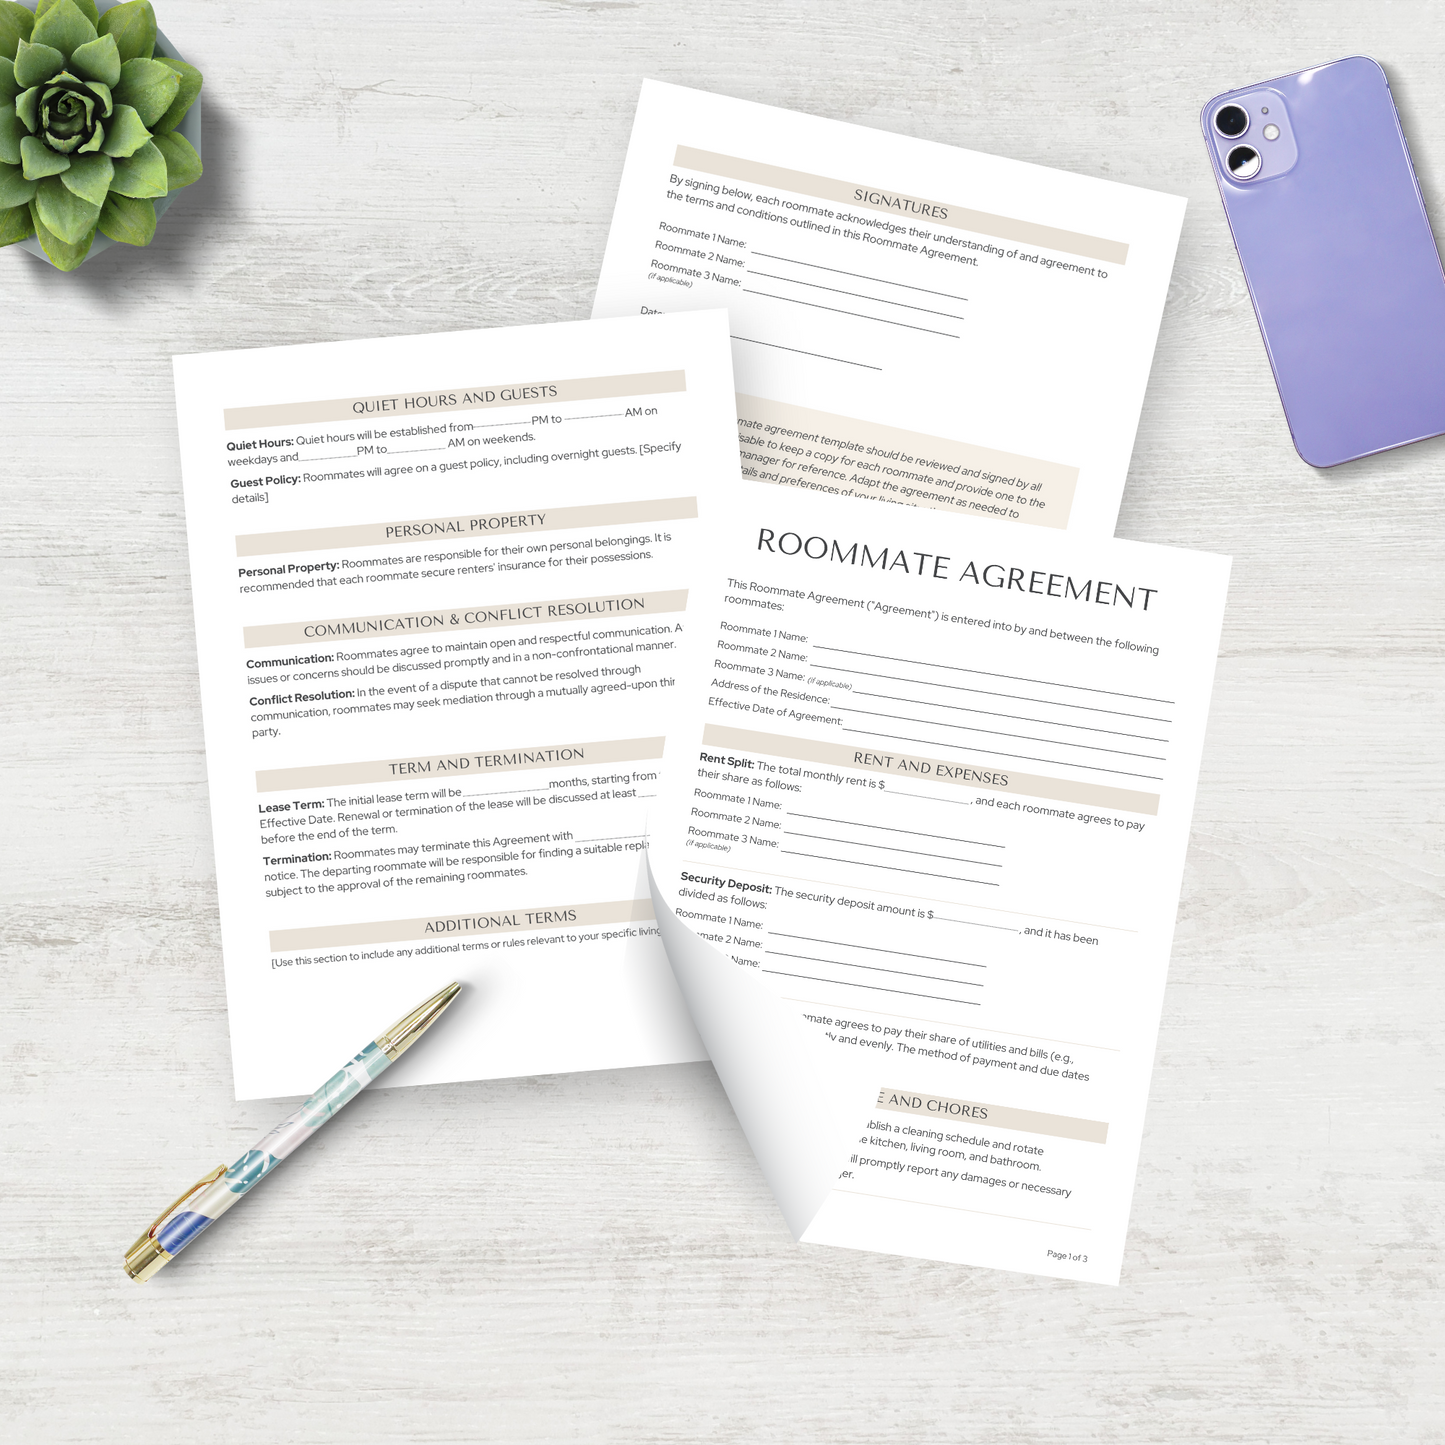 roommate agreement template perfect for apartment roommates. roommate contract agreement printable template